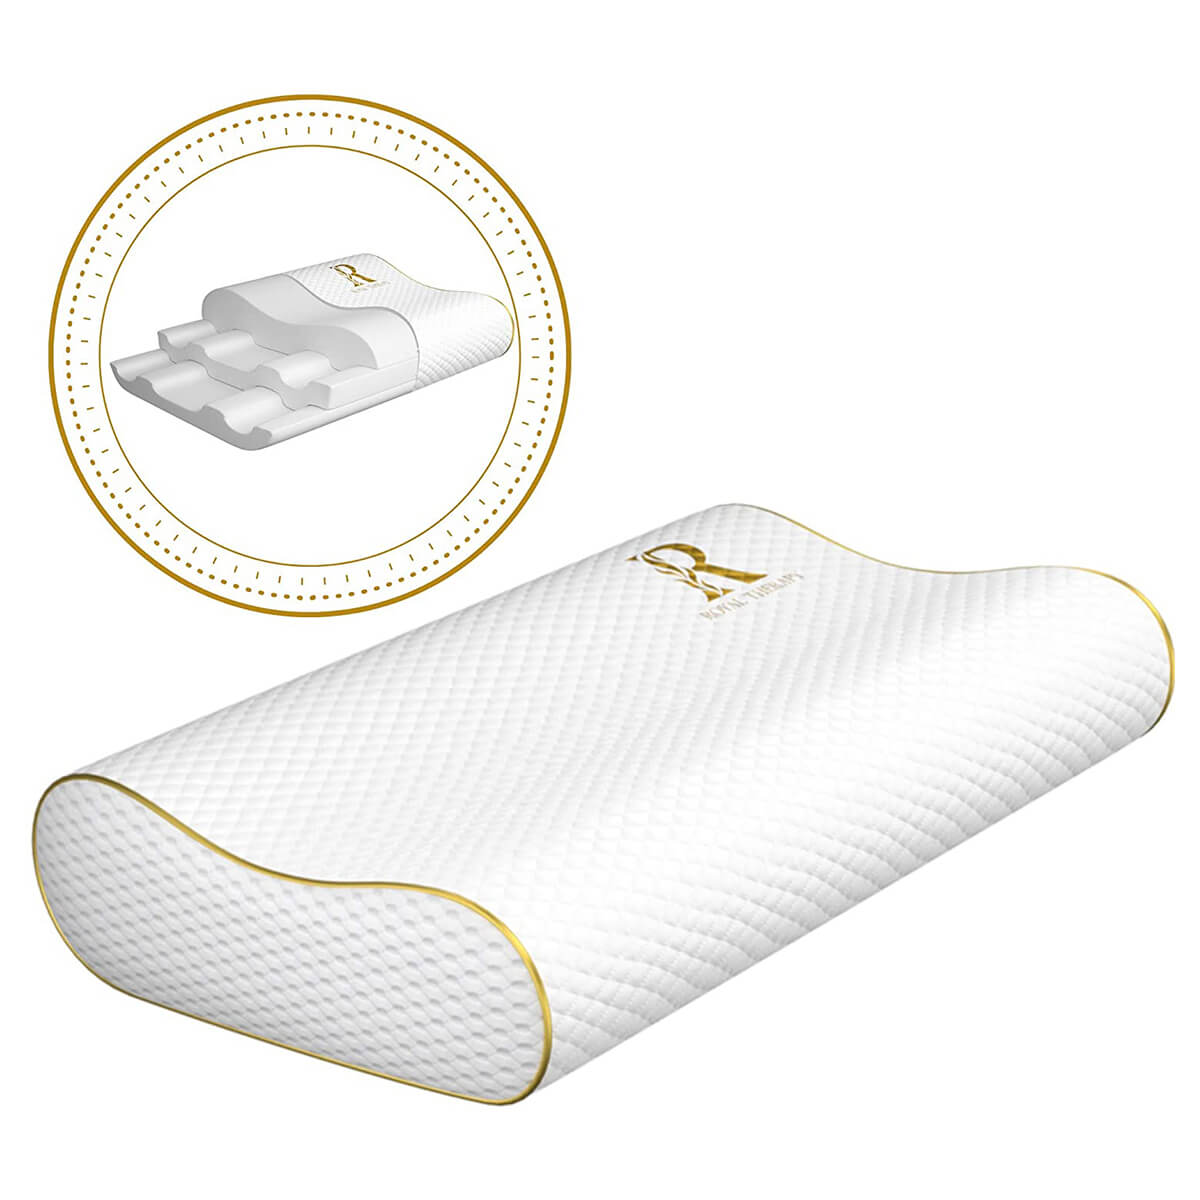 Royal Therapy Shredded Odor-Free Pillow for Neck & Shoulder Pain Relief Stomach Orthopedic Contour Pillow Bamboo Pillow CertiPUR-US Certified Support for Back Side Sleepers Memory Foam Pillow 